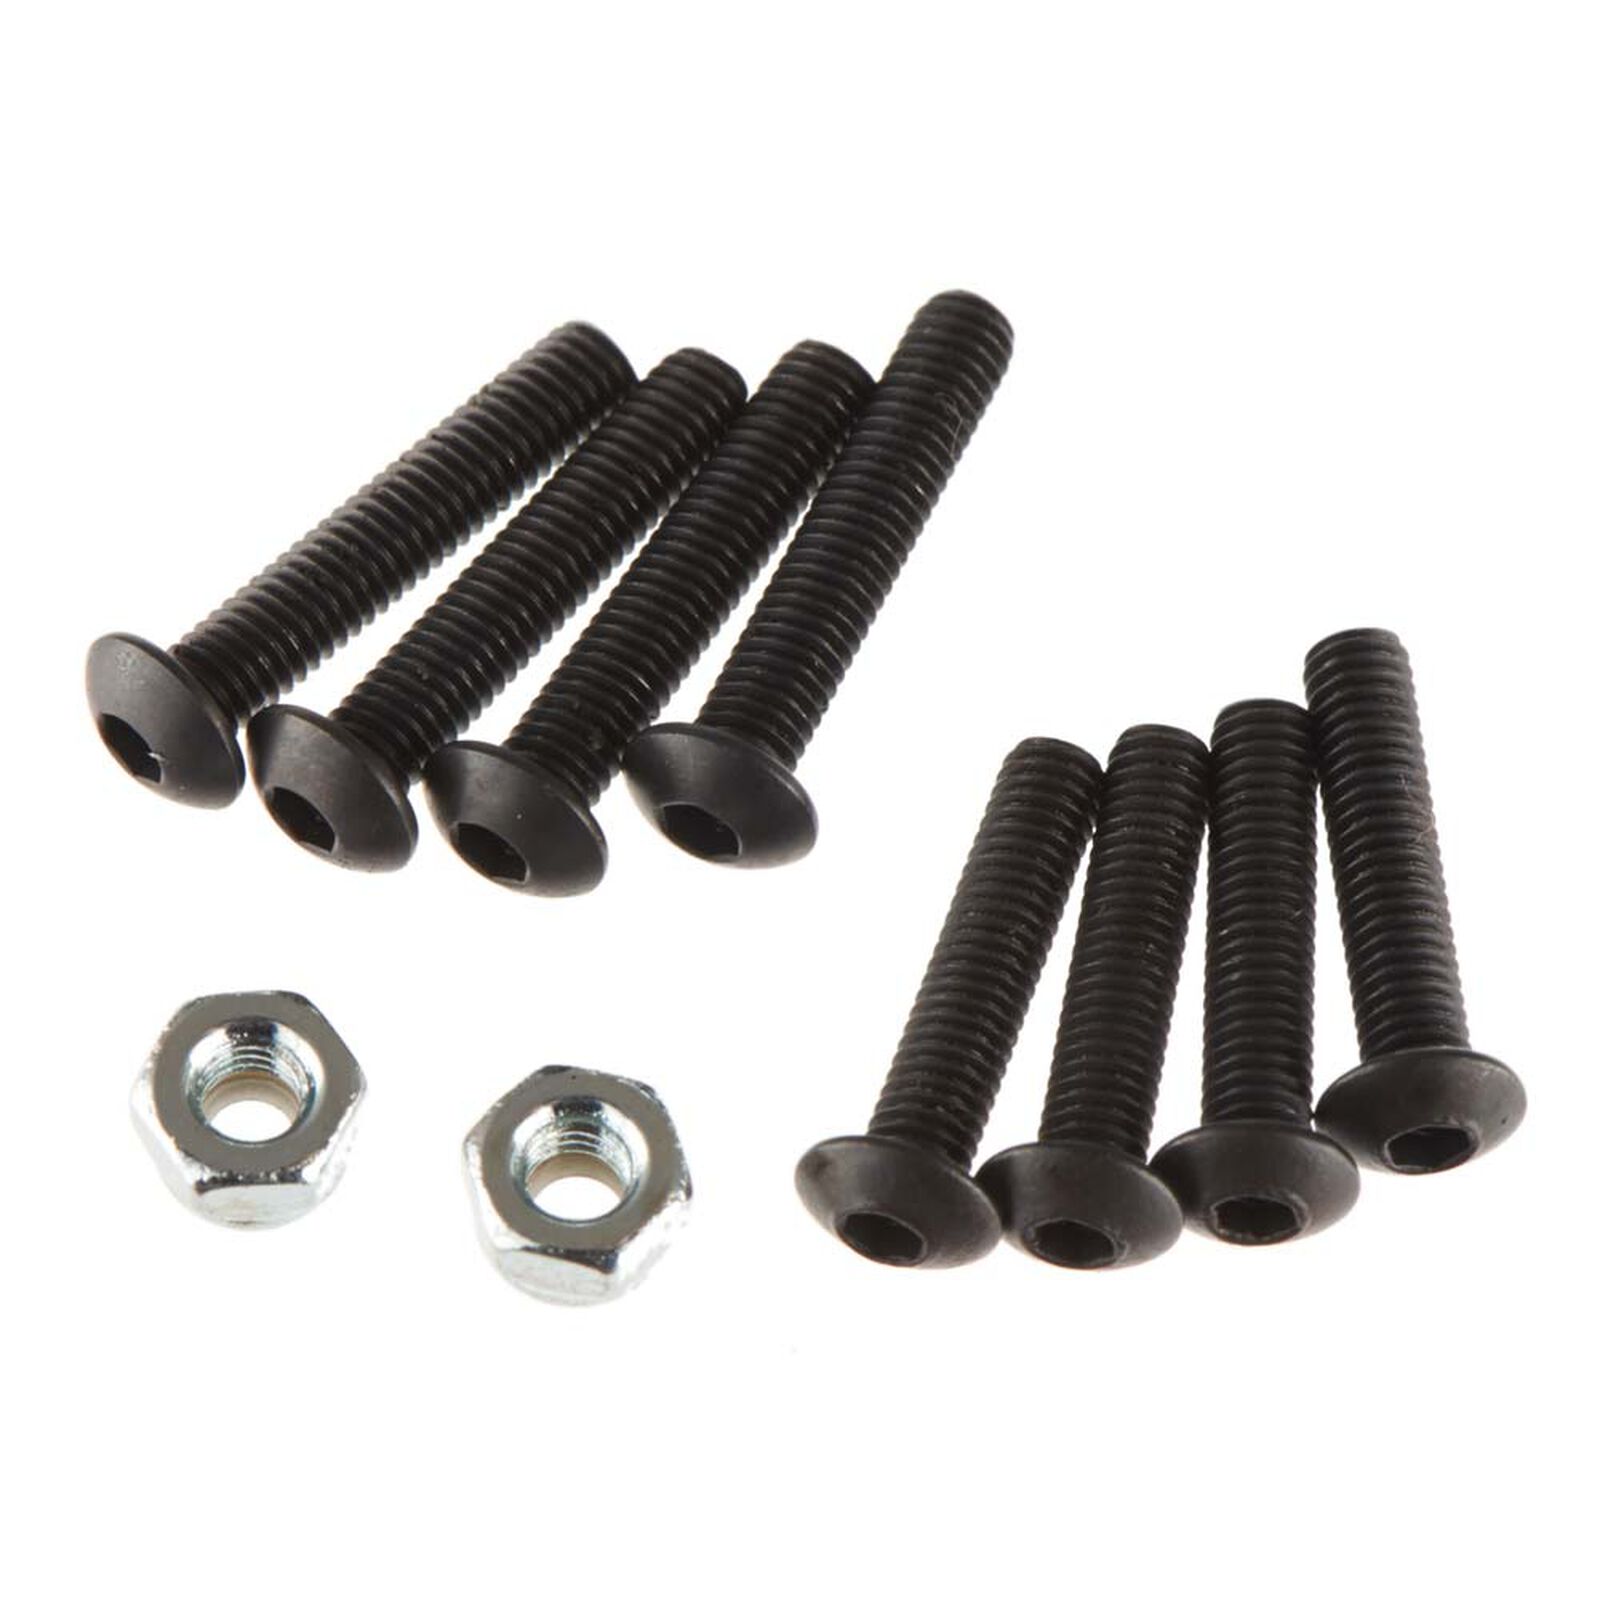 Screw Kit for RPM Wide Front A-Arms (XL-5 Version)